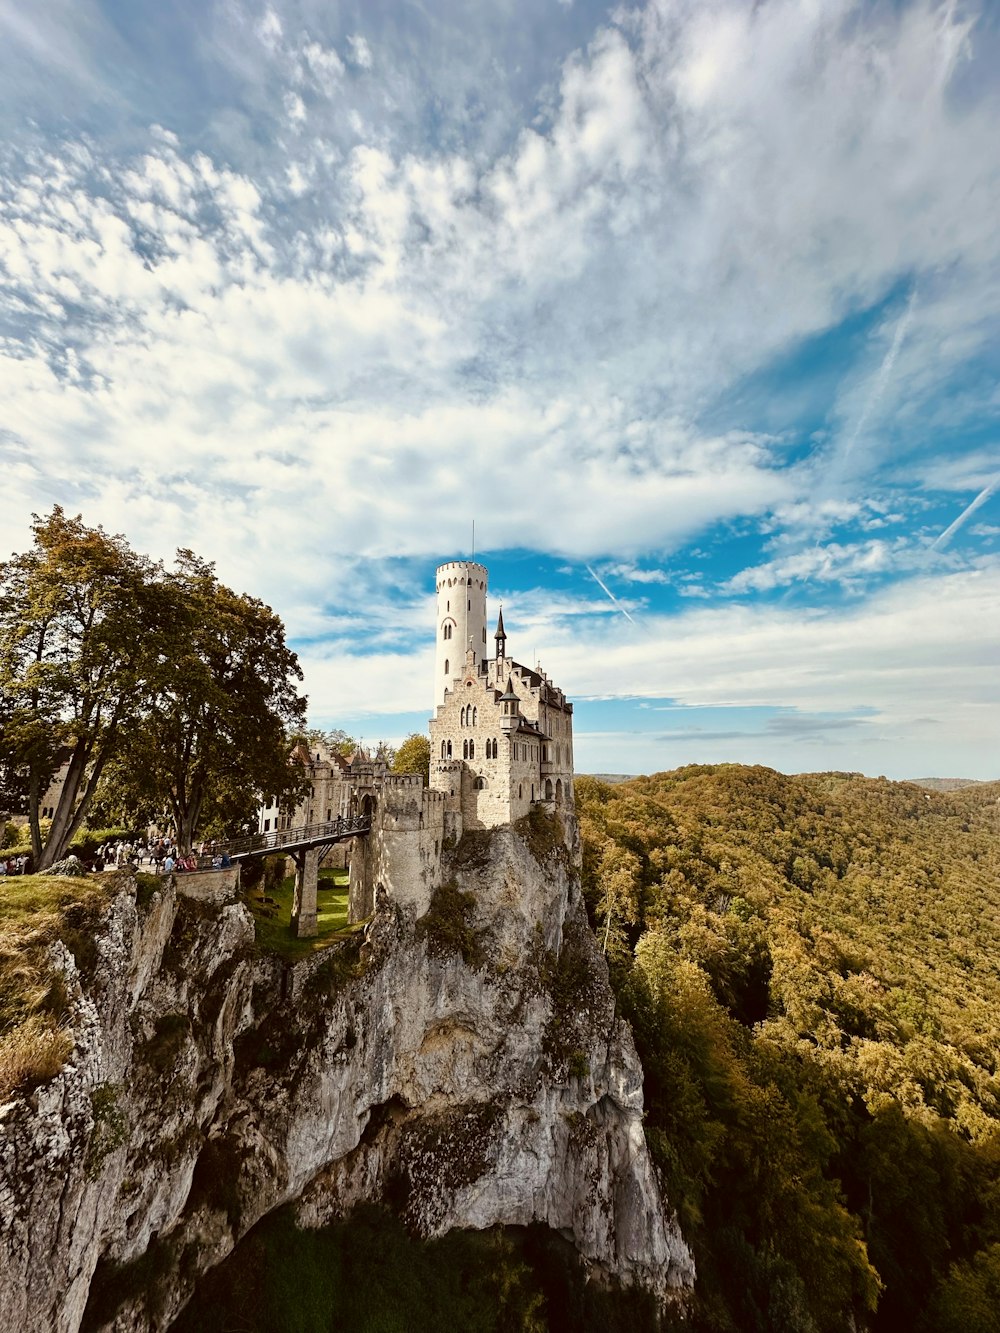 a castle sitting on top of a cliff